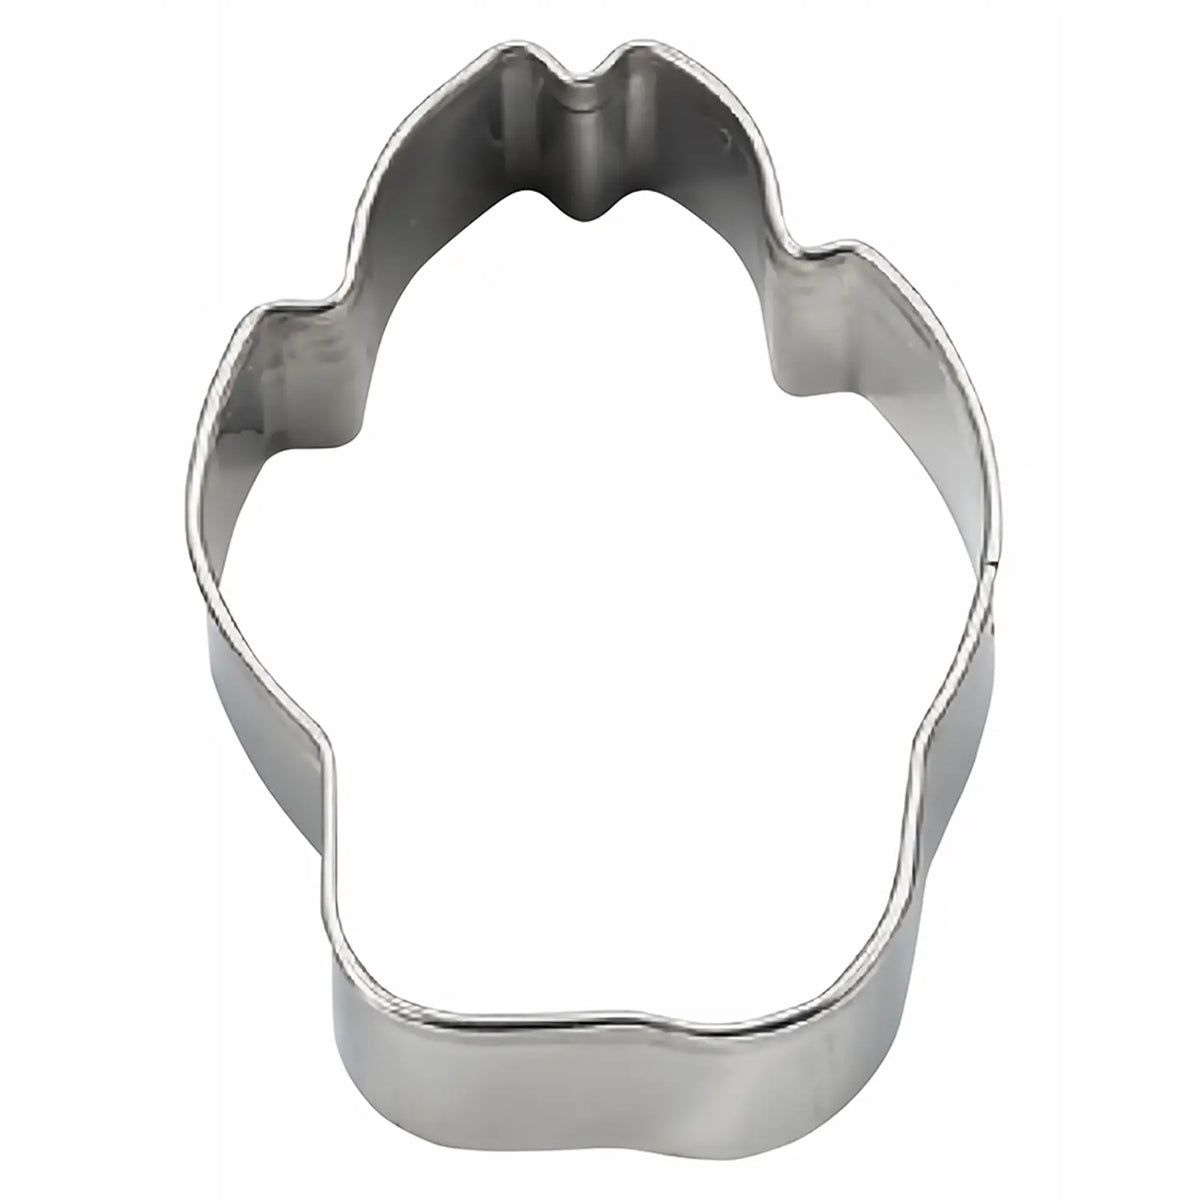 TIGERCROWN Cake Land Stainless Steel Cookie Cutter Paw